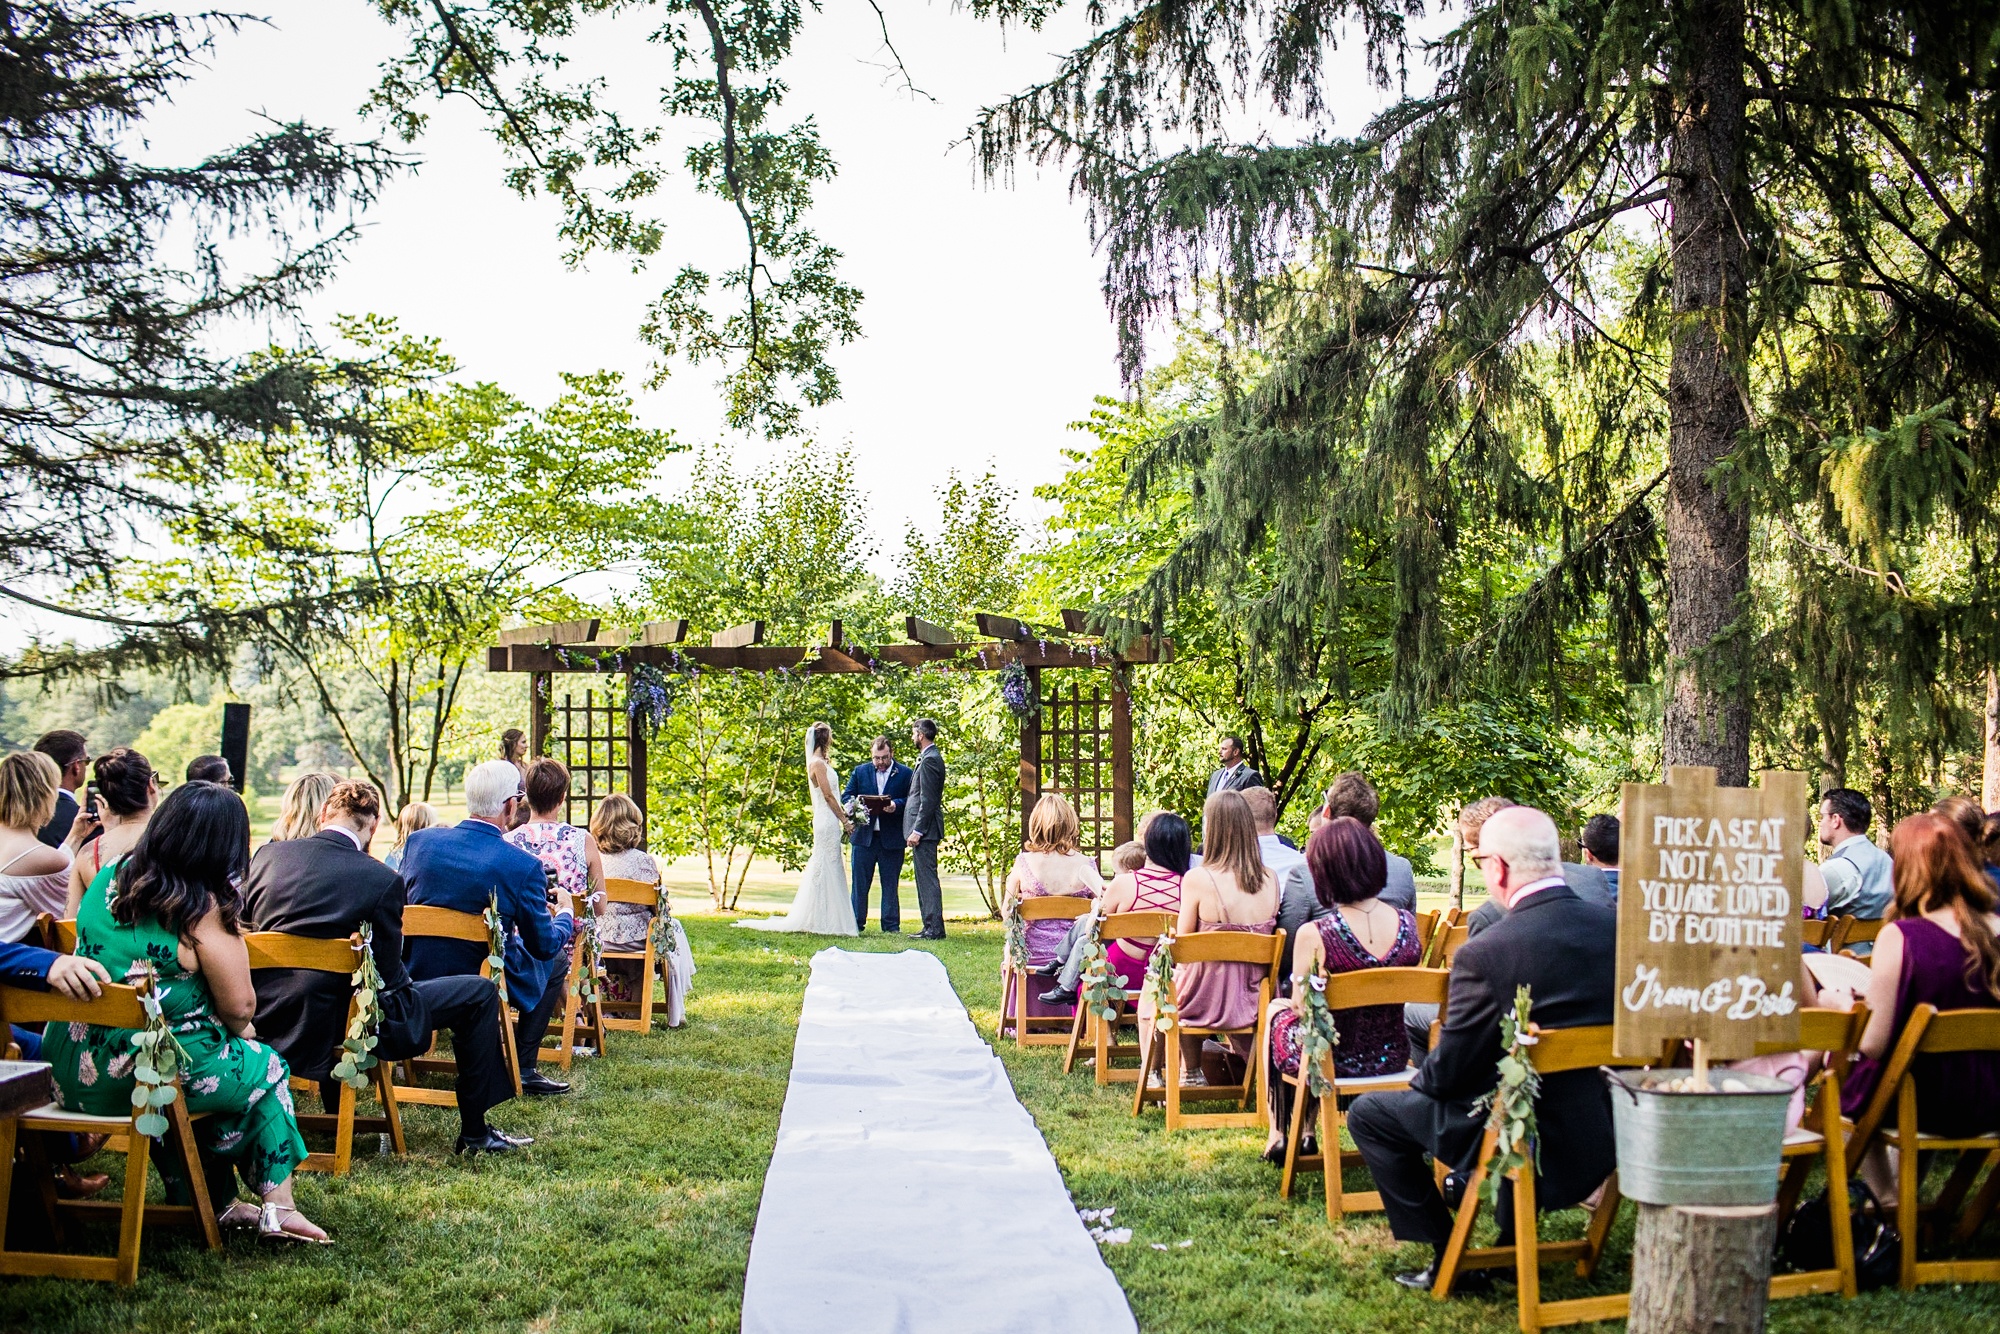 Guests watch a ceremony during a Katherine Legge Memorial lodge wedding